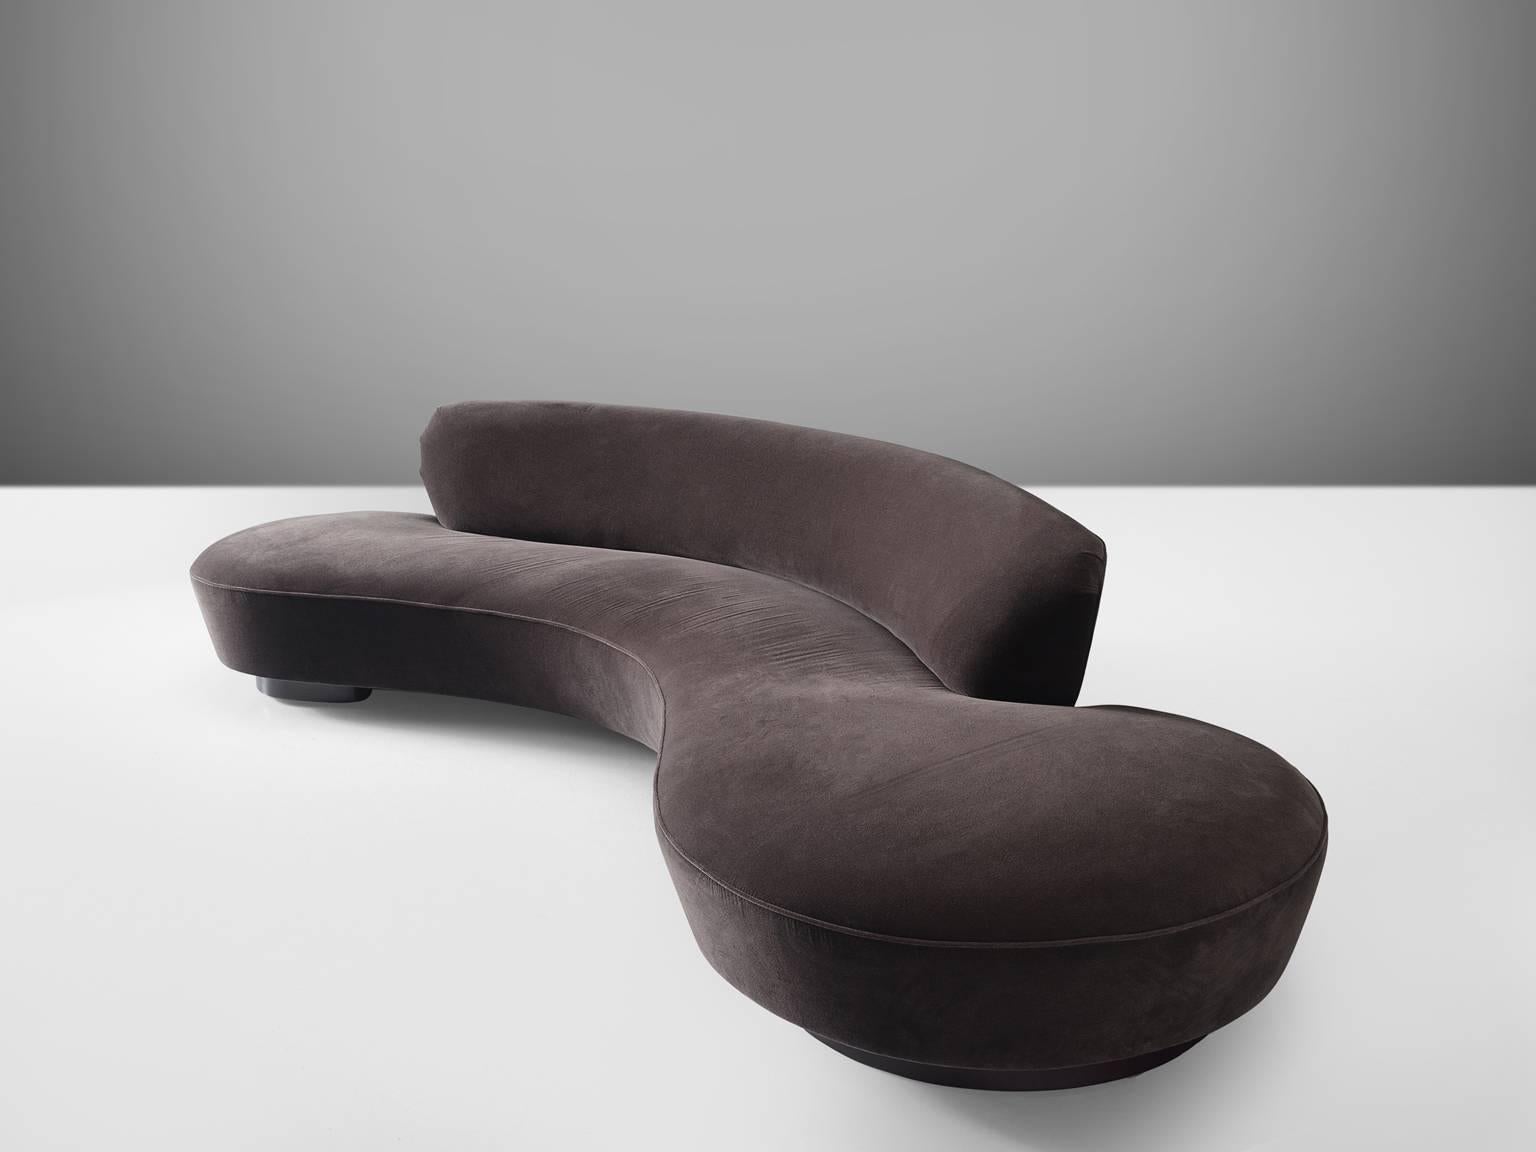 Vladimir Kagan, velvet, chrome, United States, 1960s

This serpentine sofa by Vladimir Kagan is part of the midcentury design collection. The sofa has a sculptural beauty thanks to its absolute clarity of forms. It features two round pedestals,